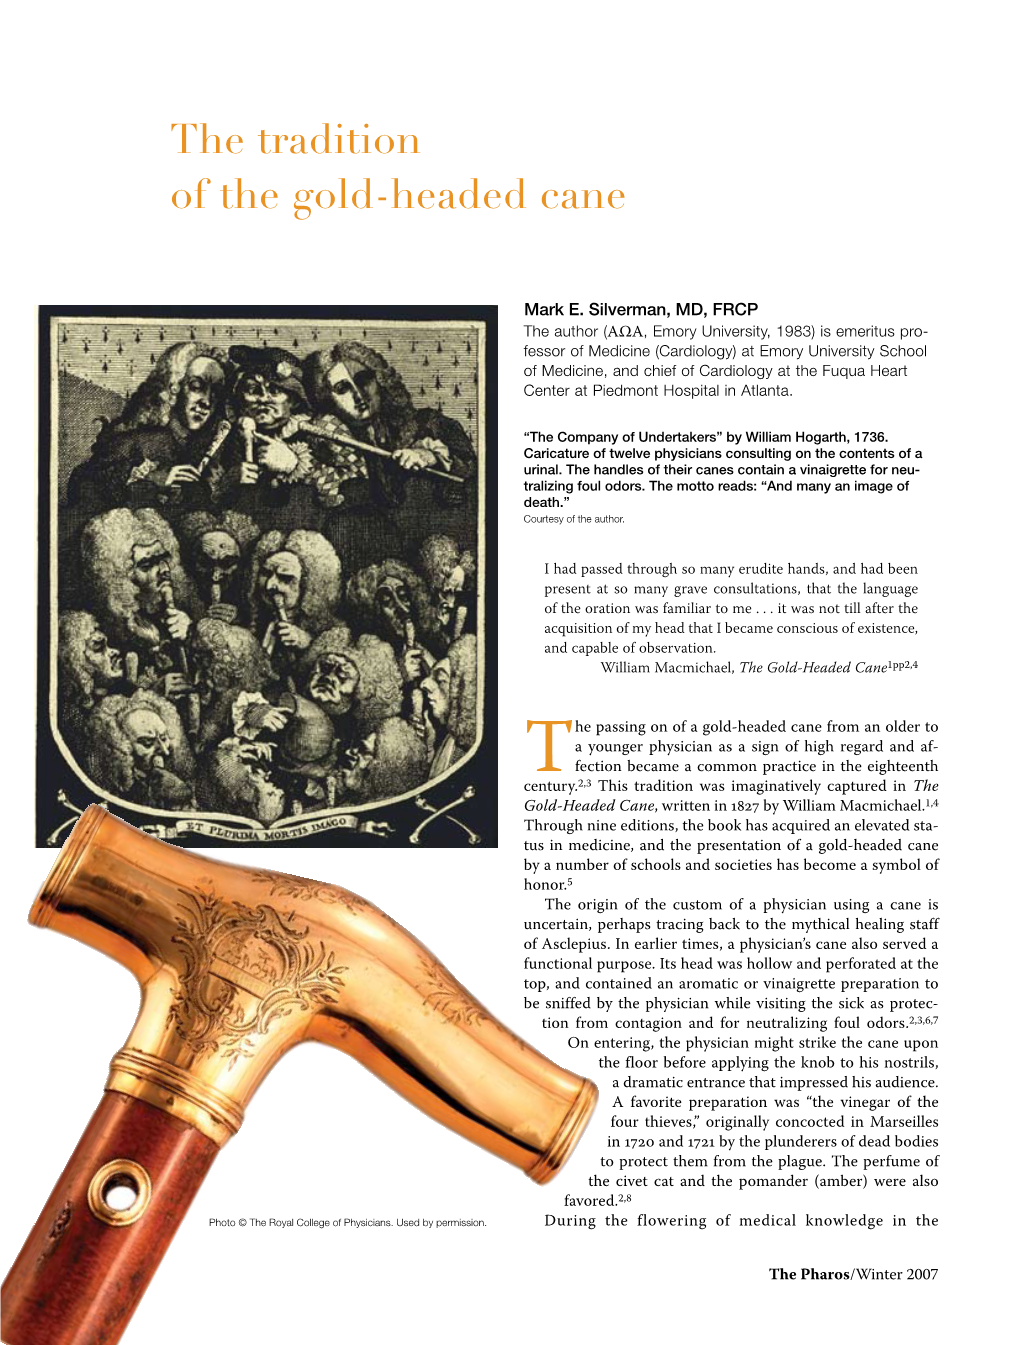 The Tradition of the Gold-Headed Cane